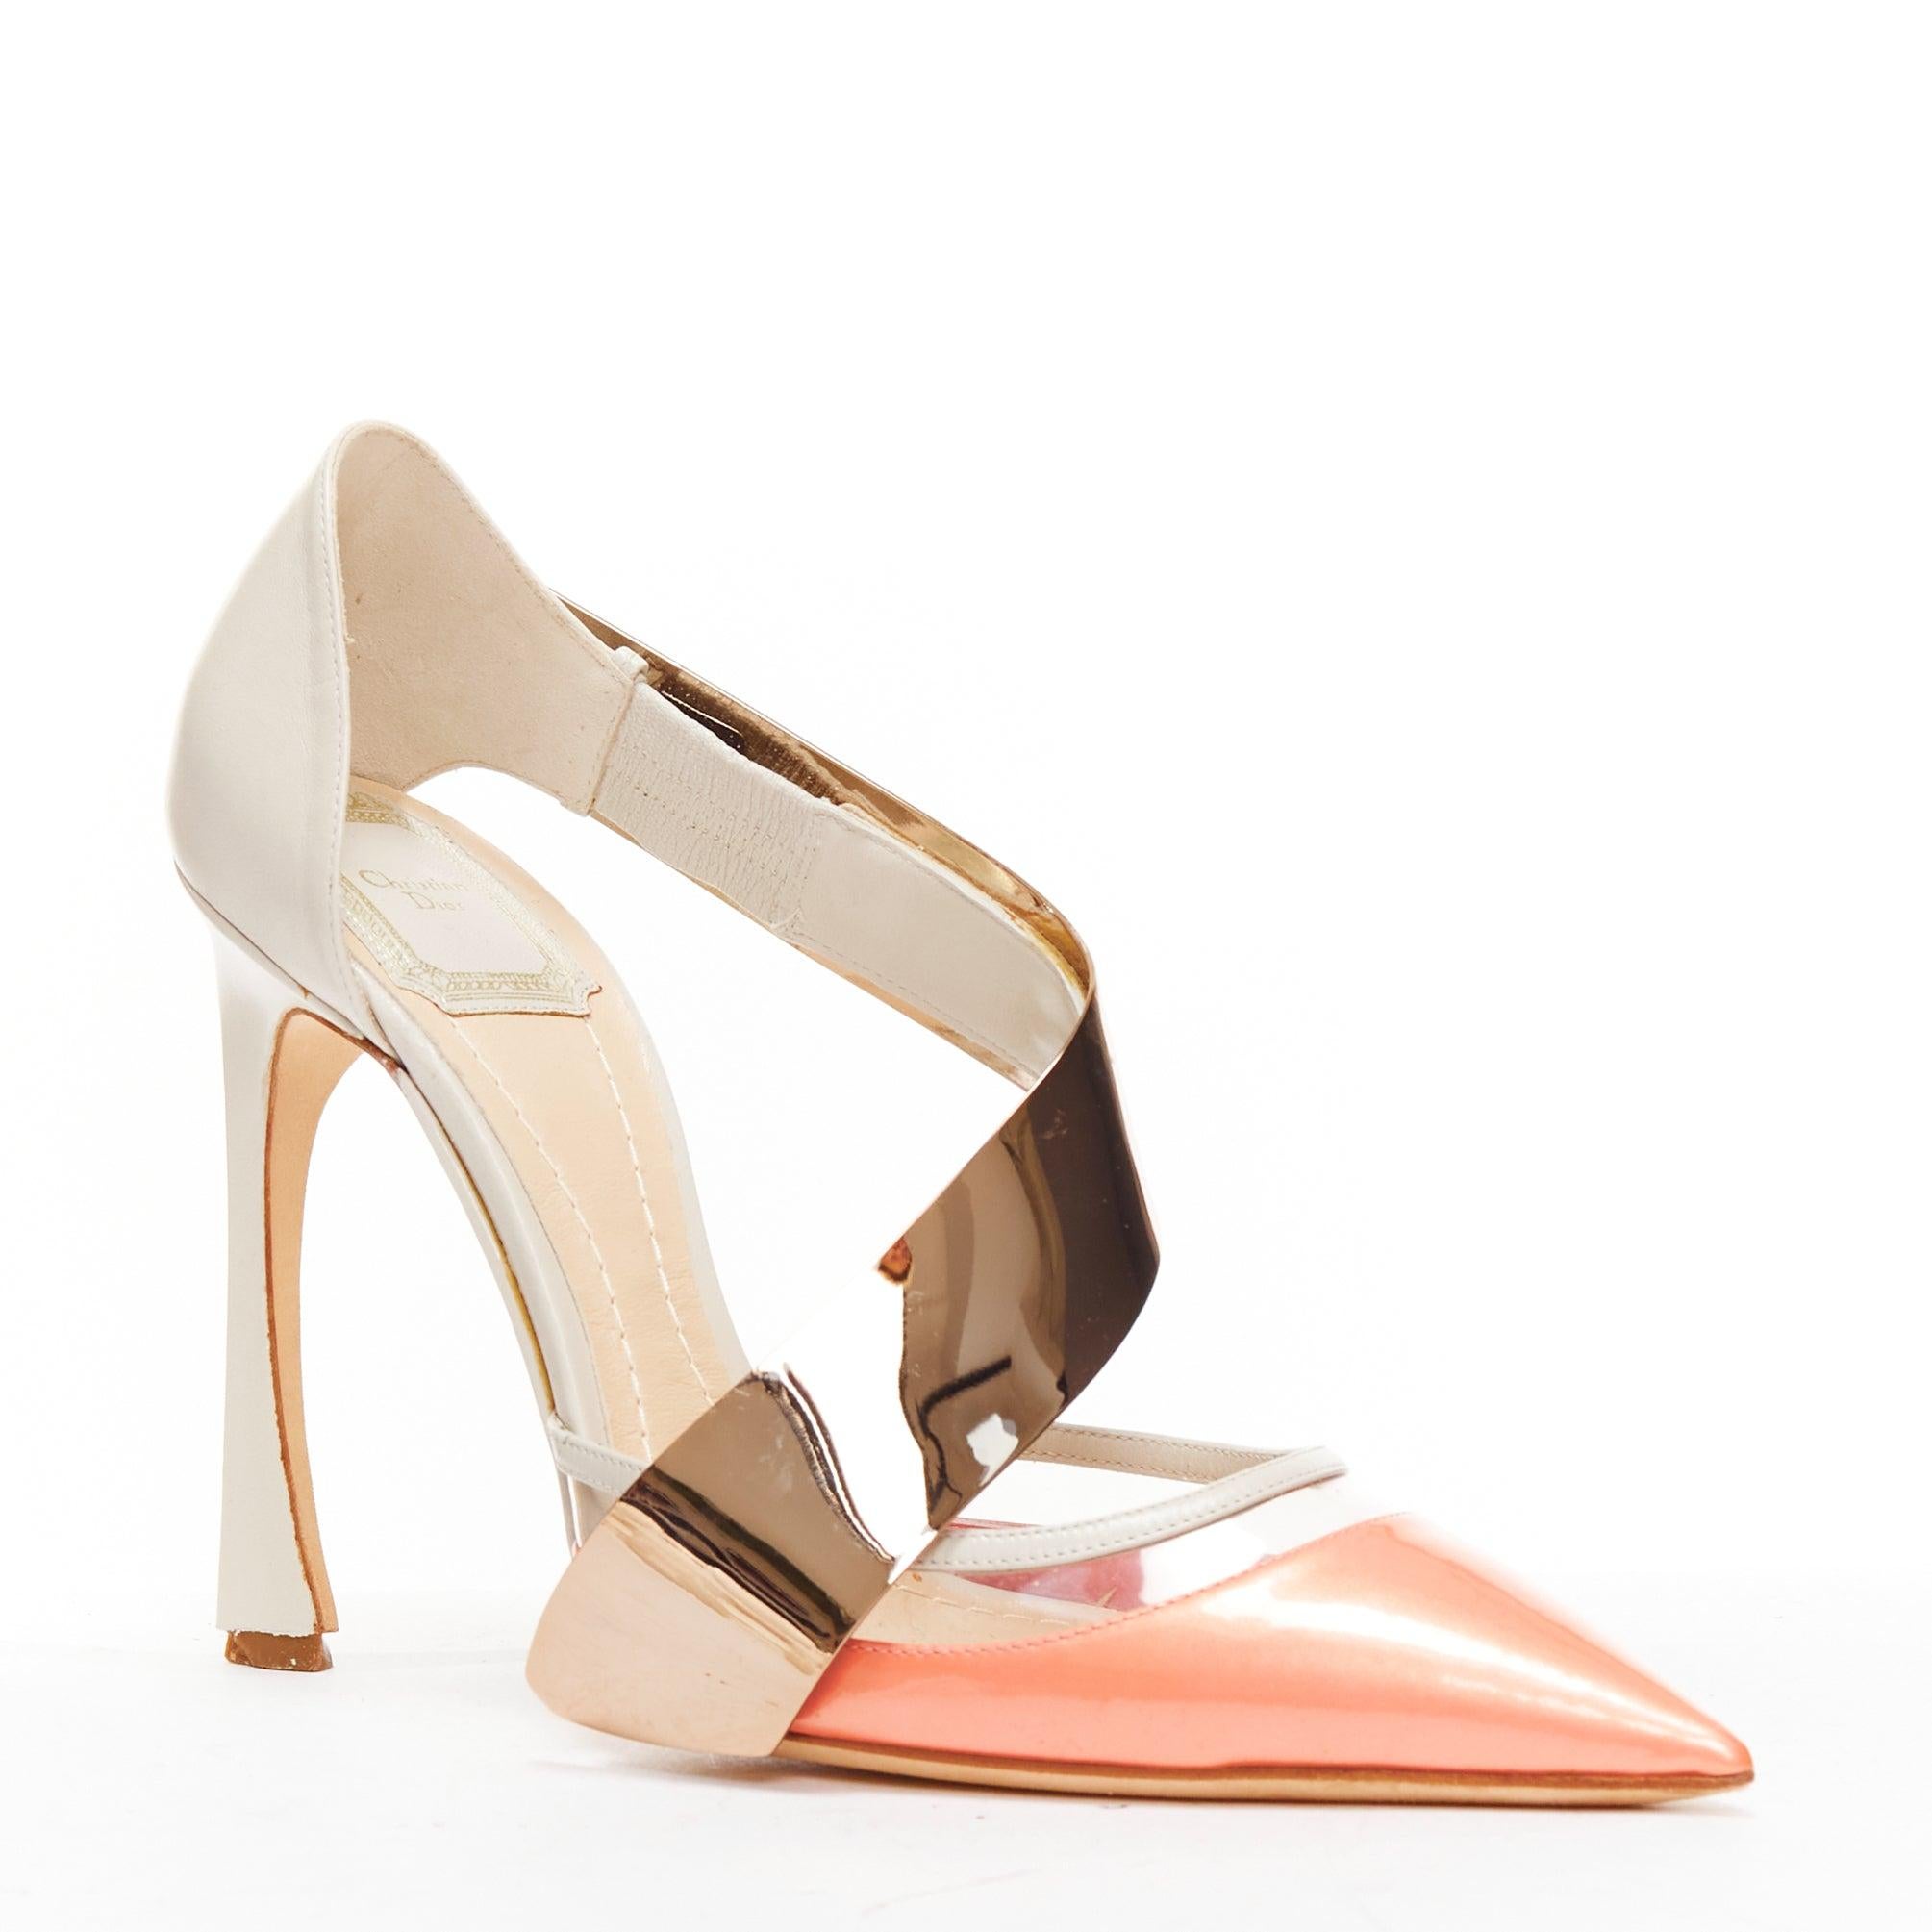 CHRISTIAN DIOR Raf Simons metal bar pink patent curved heel pumps EU38
Reference: BSHW/A00153
Brand: Christian Dior
Designer: Raf Simons
Material: Patent Leather, Metal, PVC
Color: Pink, Rose Gold
Pattern: Solid
Closure: Elasticated
Lining: Nude